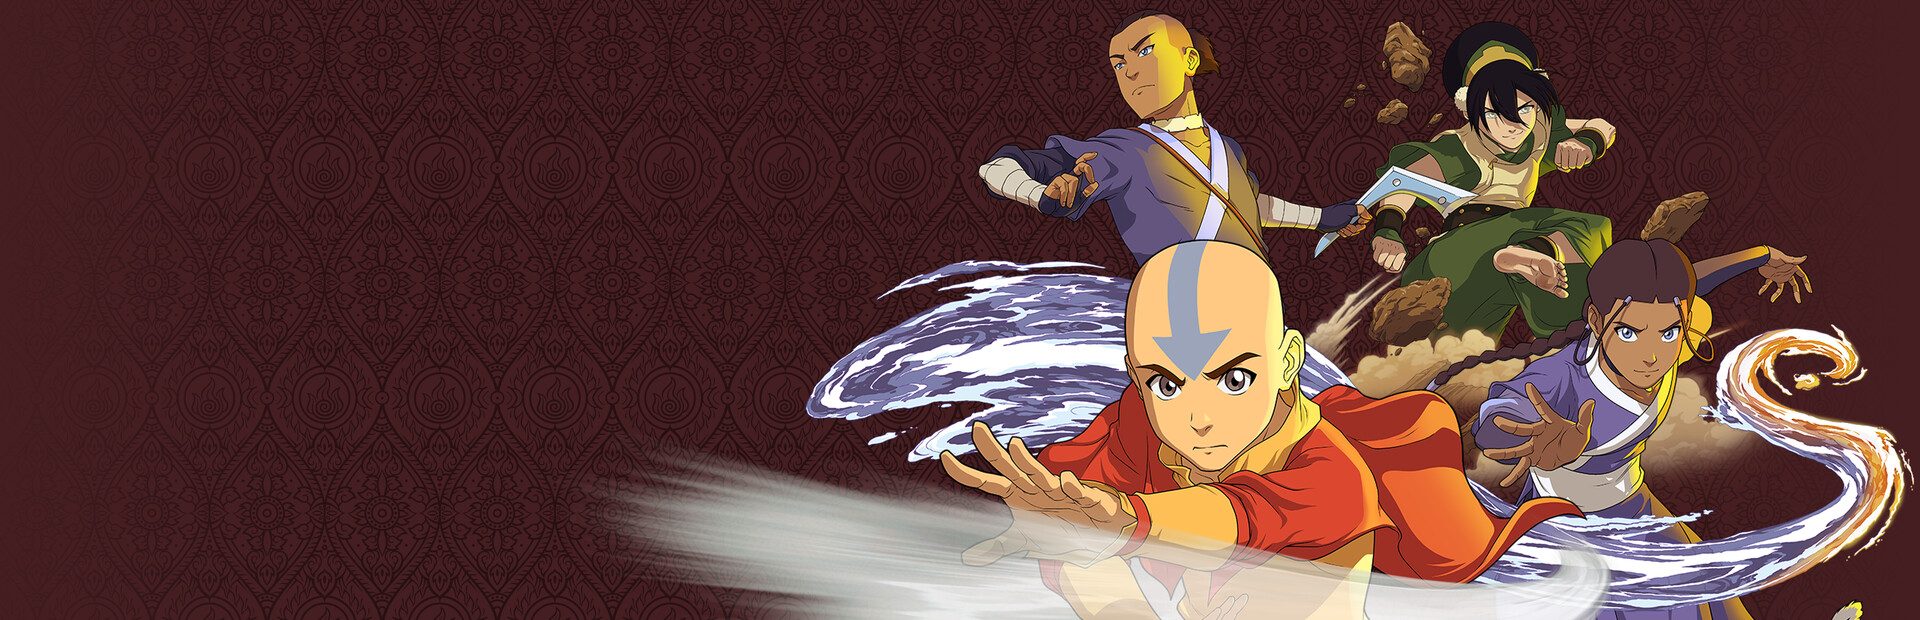 Avatar: The Last Airbender - Quest for Balance cover image